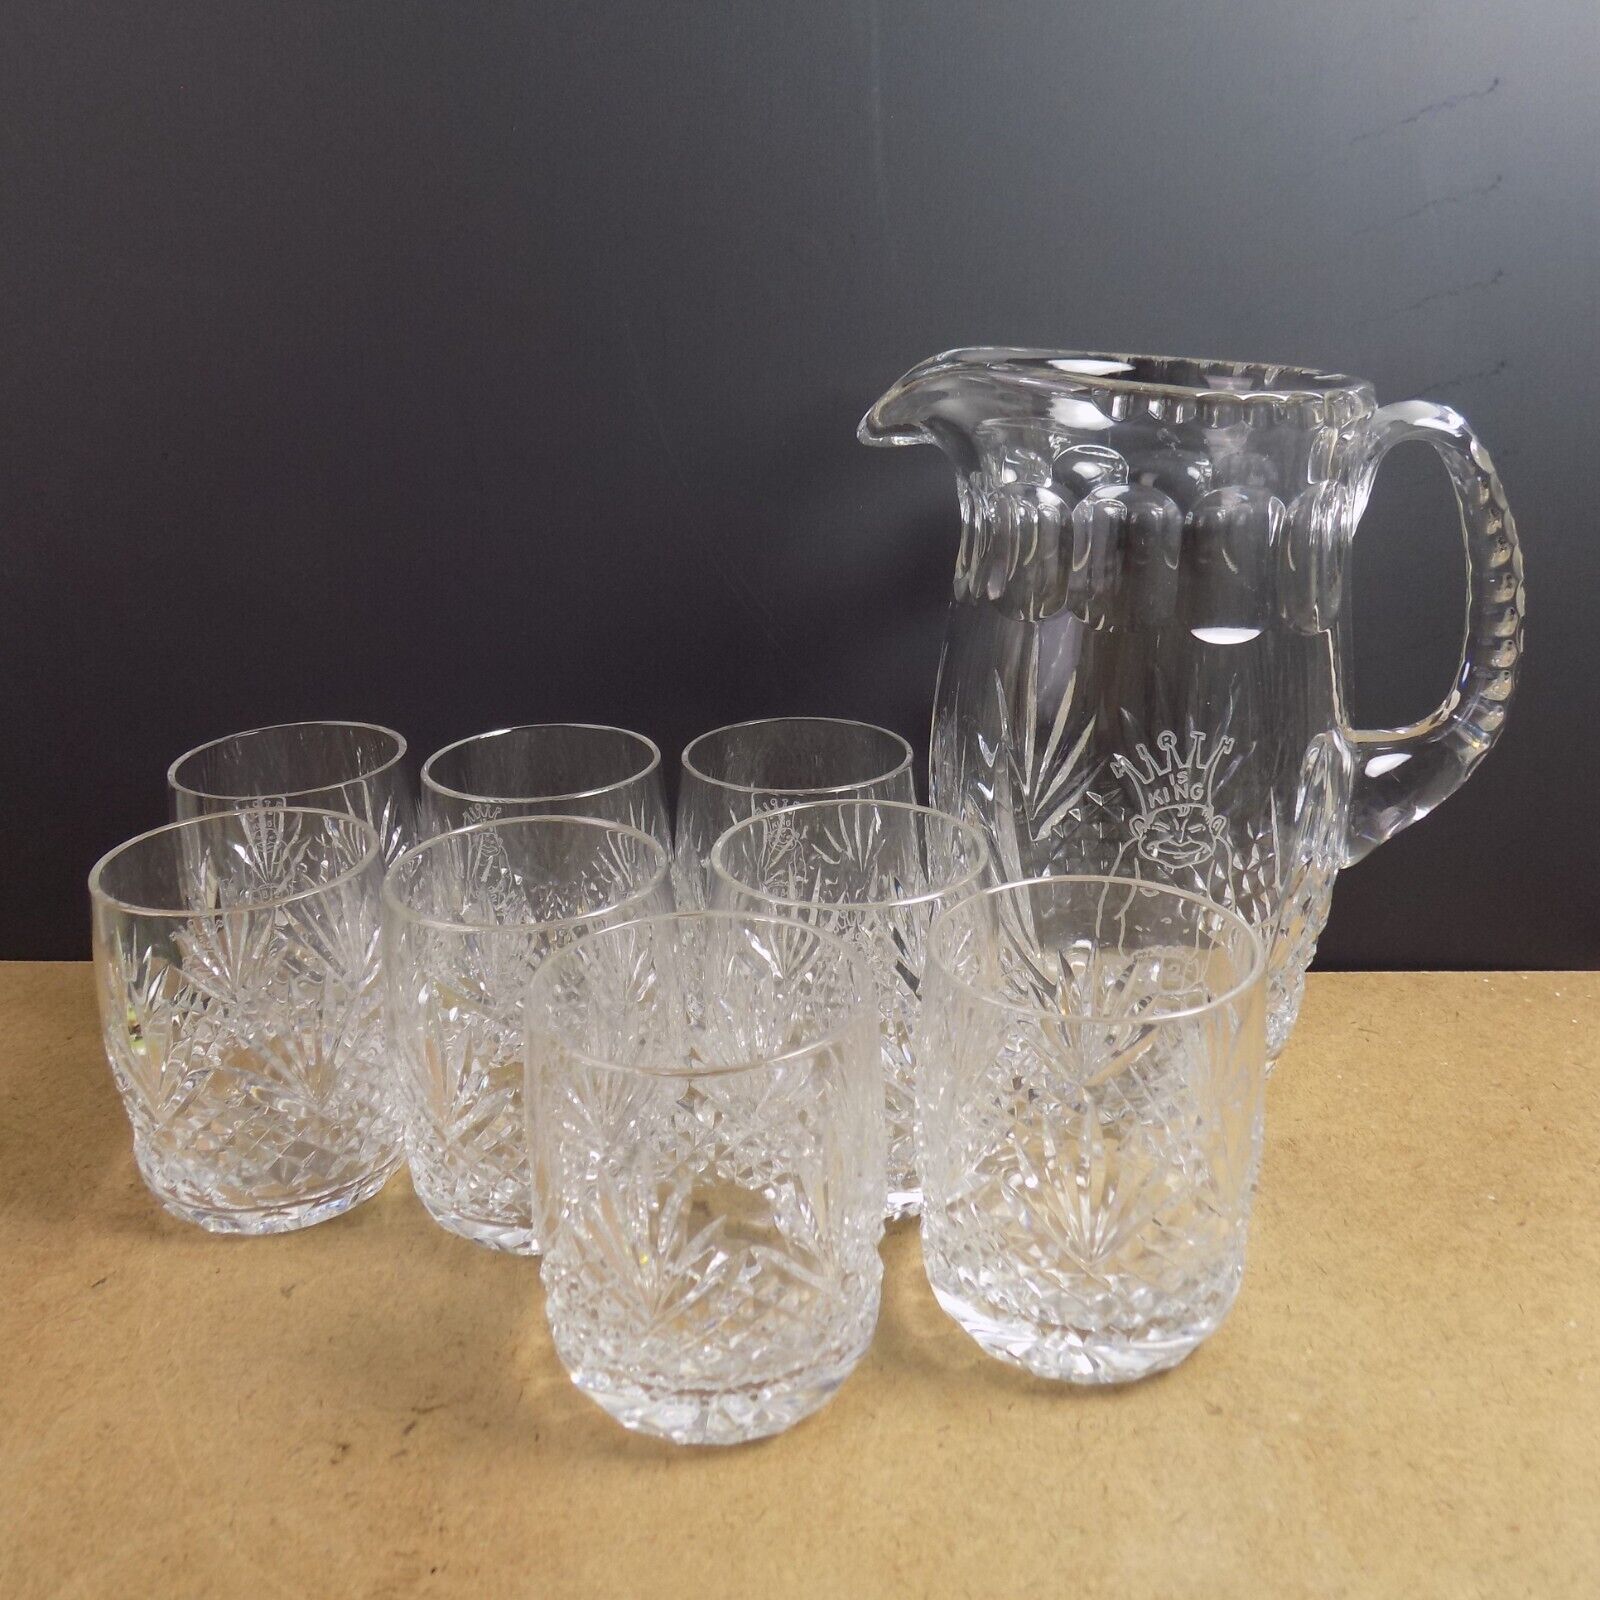 Billiken Mirth is King Royal Order of Jesters Etched Glass Pitcher & Tumblers